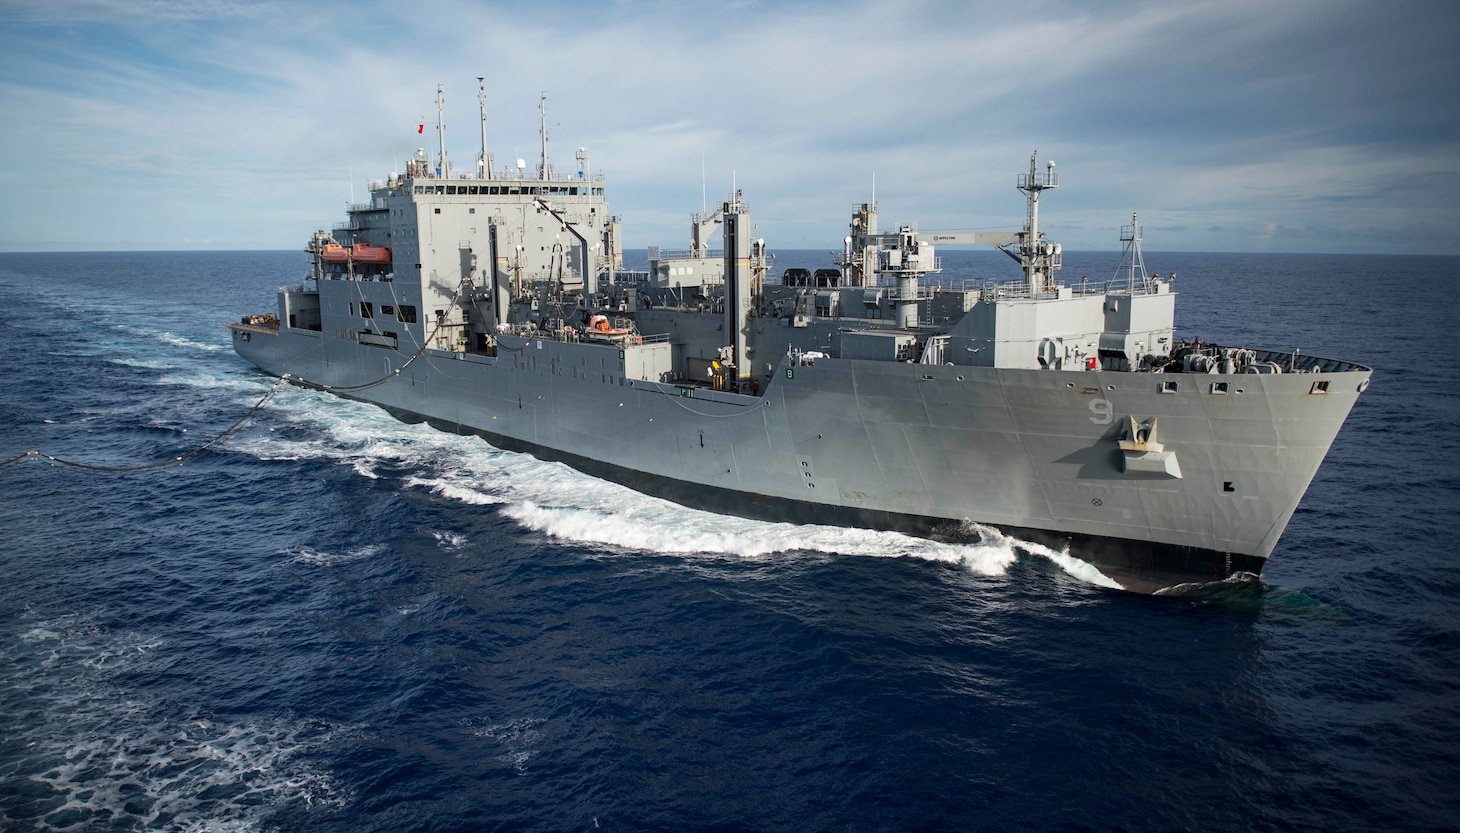 Official U.S. Navy file photo of dry cargo ship USNS Matthew Perry (T-AKE 9).